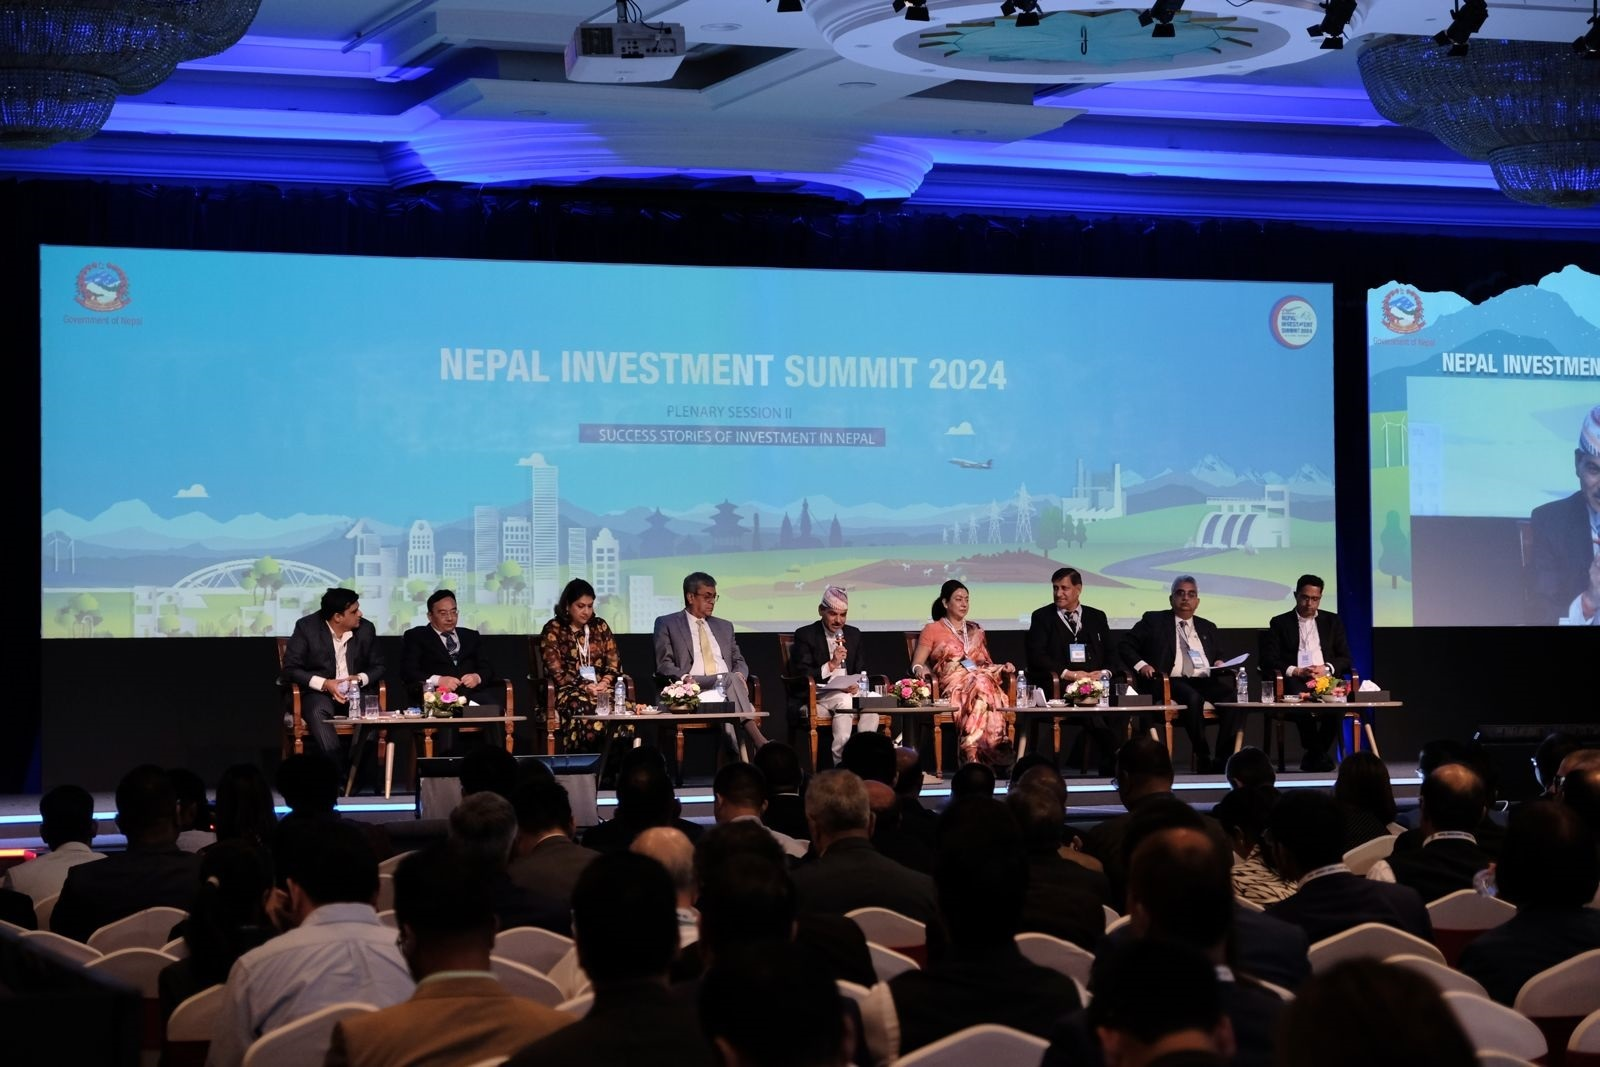 Upper Marsyangdi Project Company participated in the 3rd Nepal Investment Summit